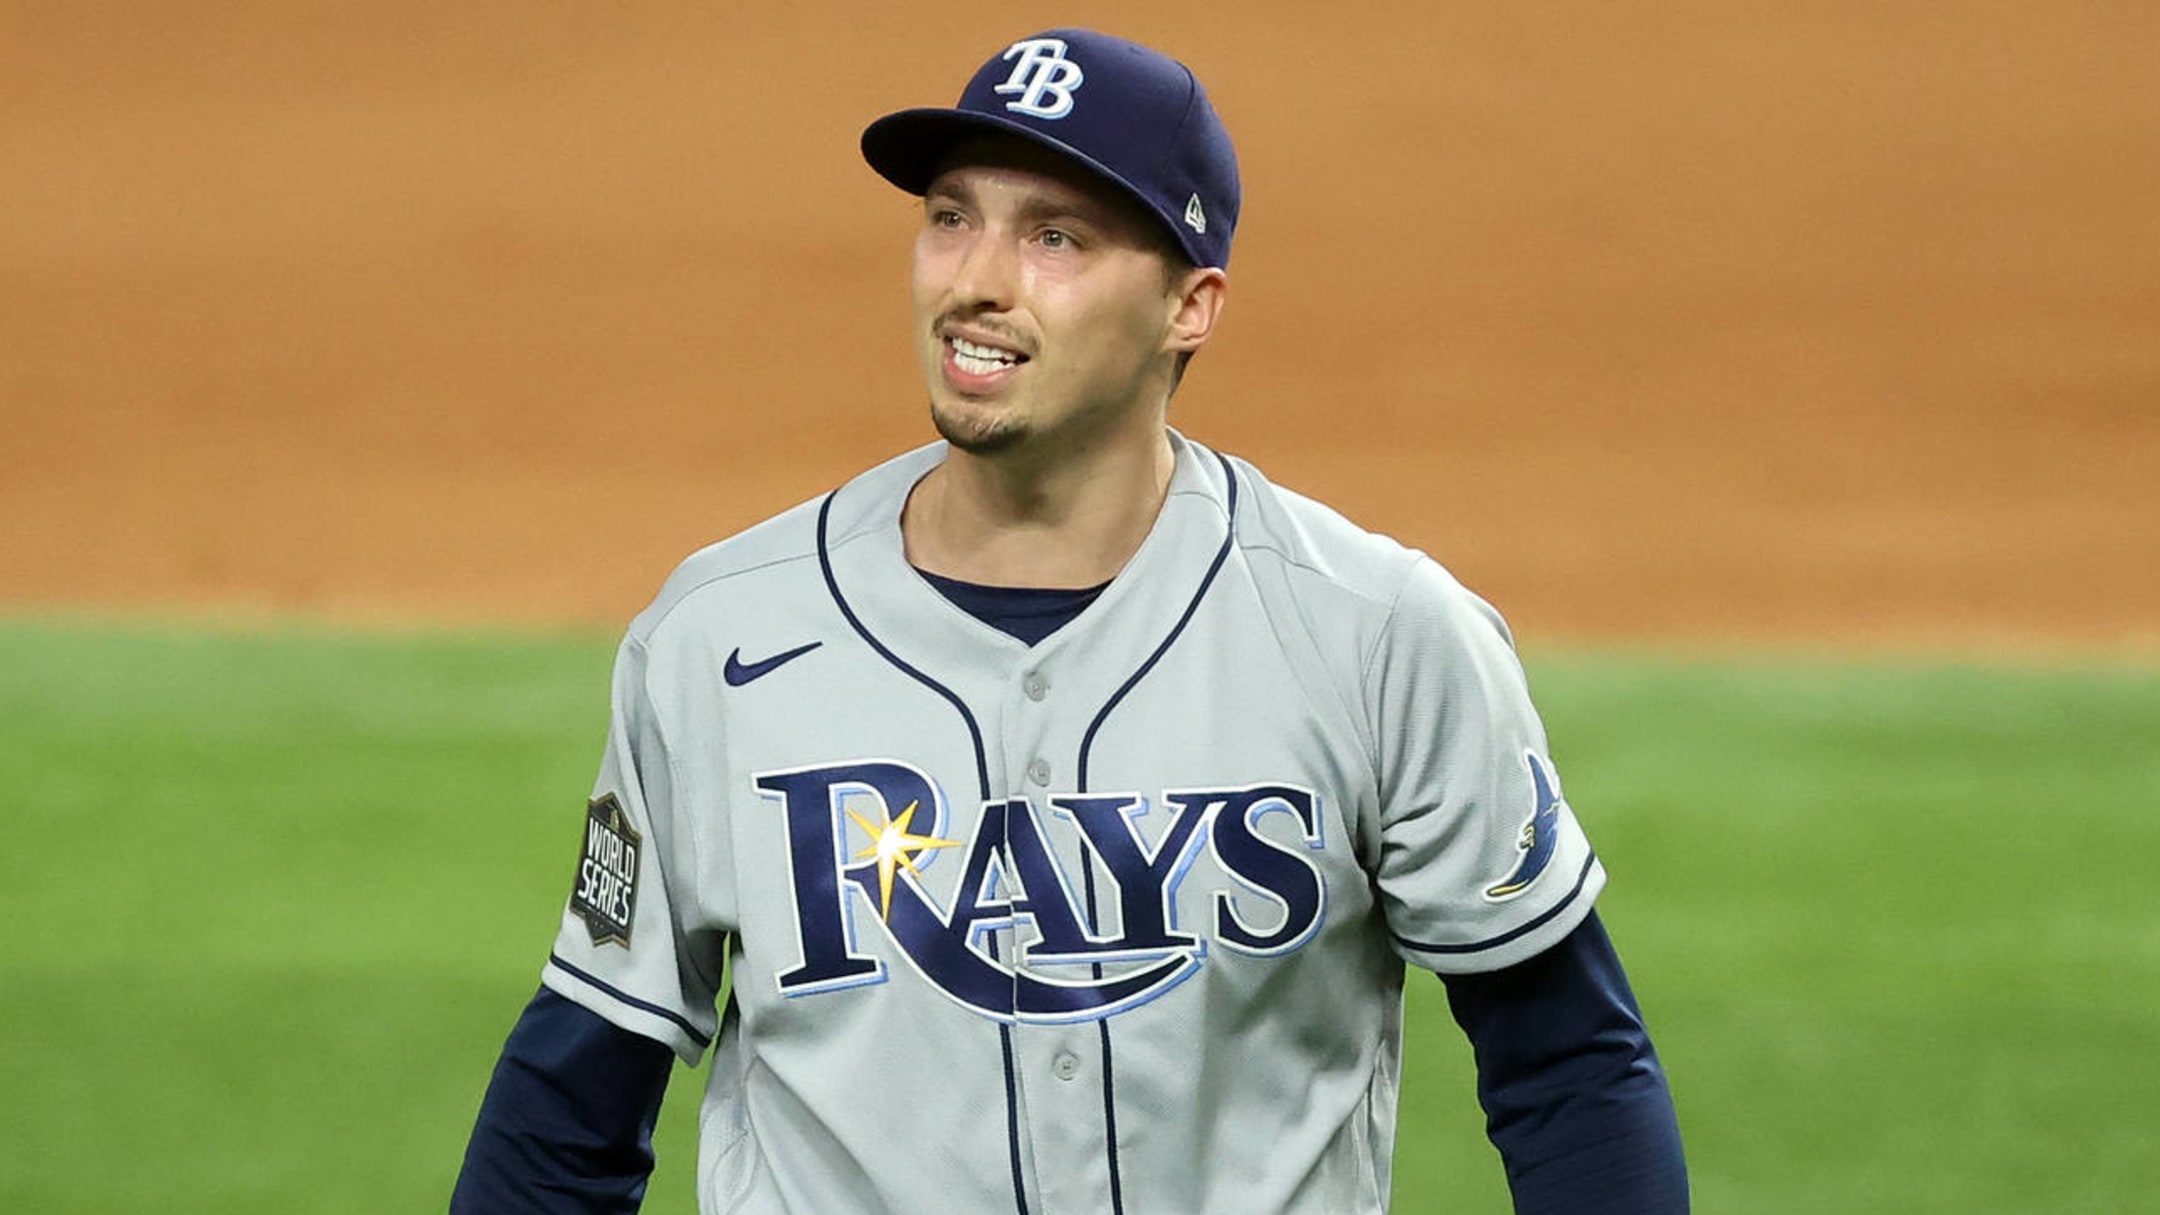 Pulling Blake Snell in Game 6 of the World Series was not the